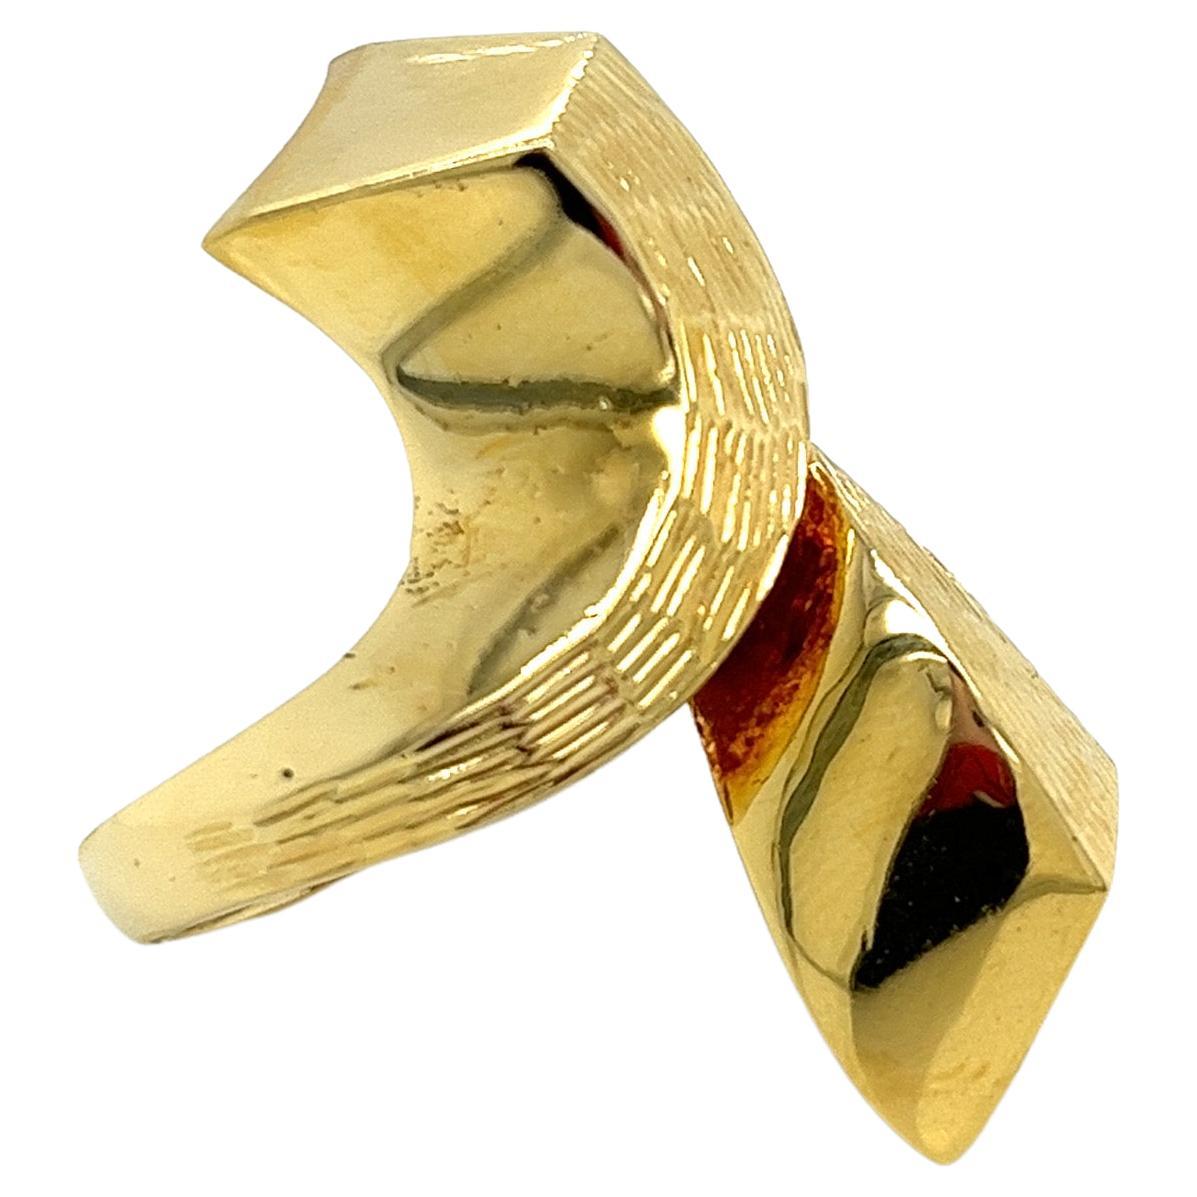 Vintage 1980's 18k Yellow Gold Bold Bypass Statement Ring. The 18k yellow gold ring has a textured finish top and measures 1.40